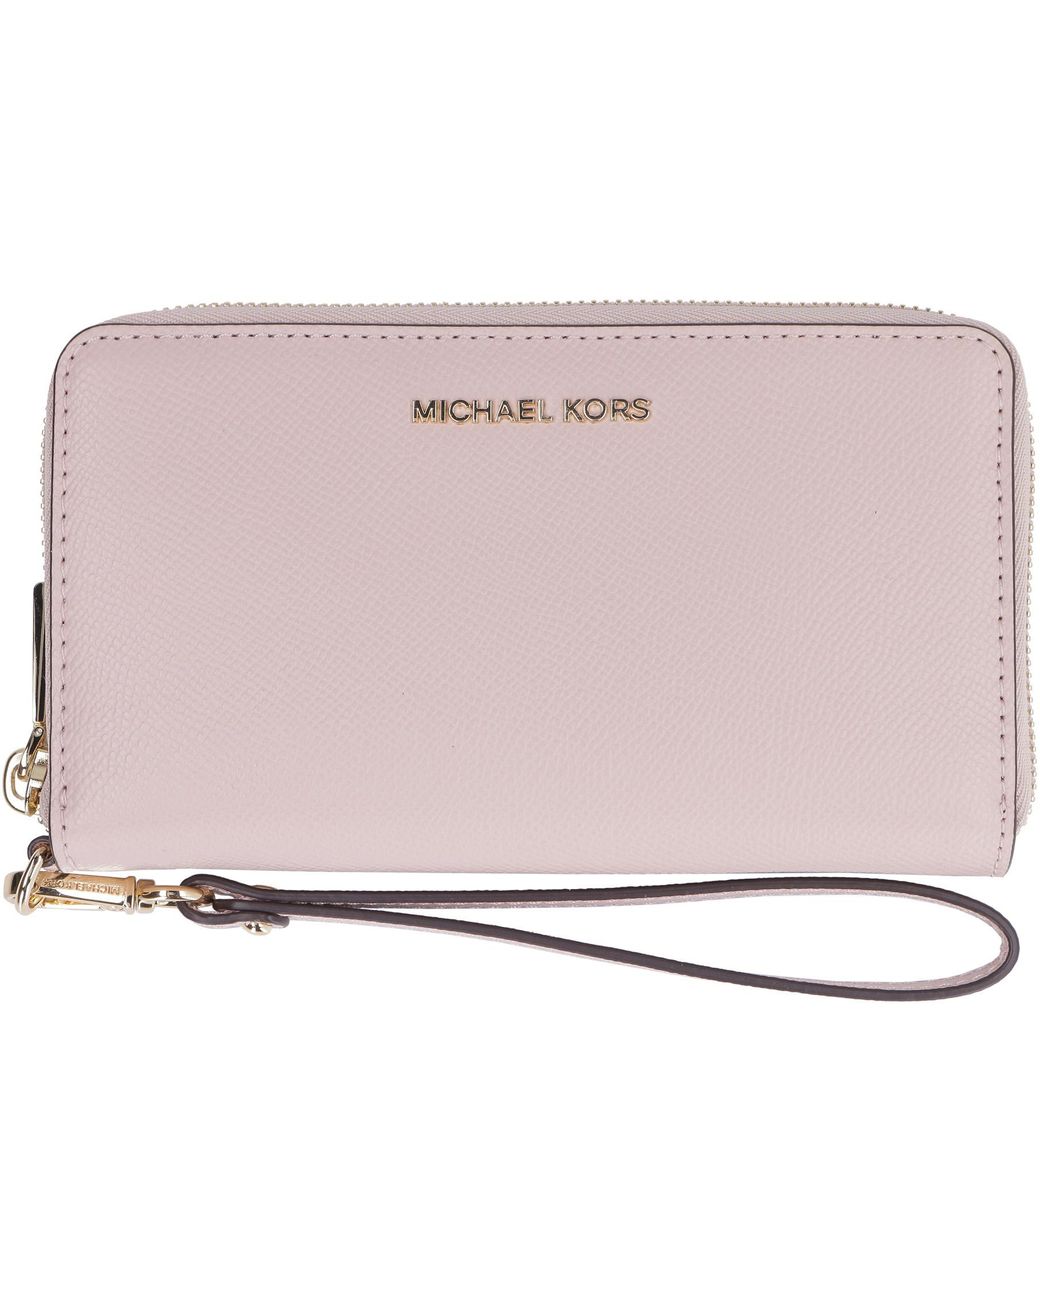 MICHAEL Michael Kors Grainy Leather Continental Wristlet in Pink - Lyst